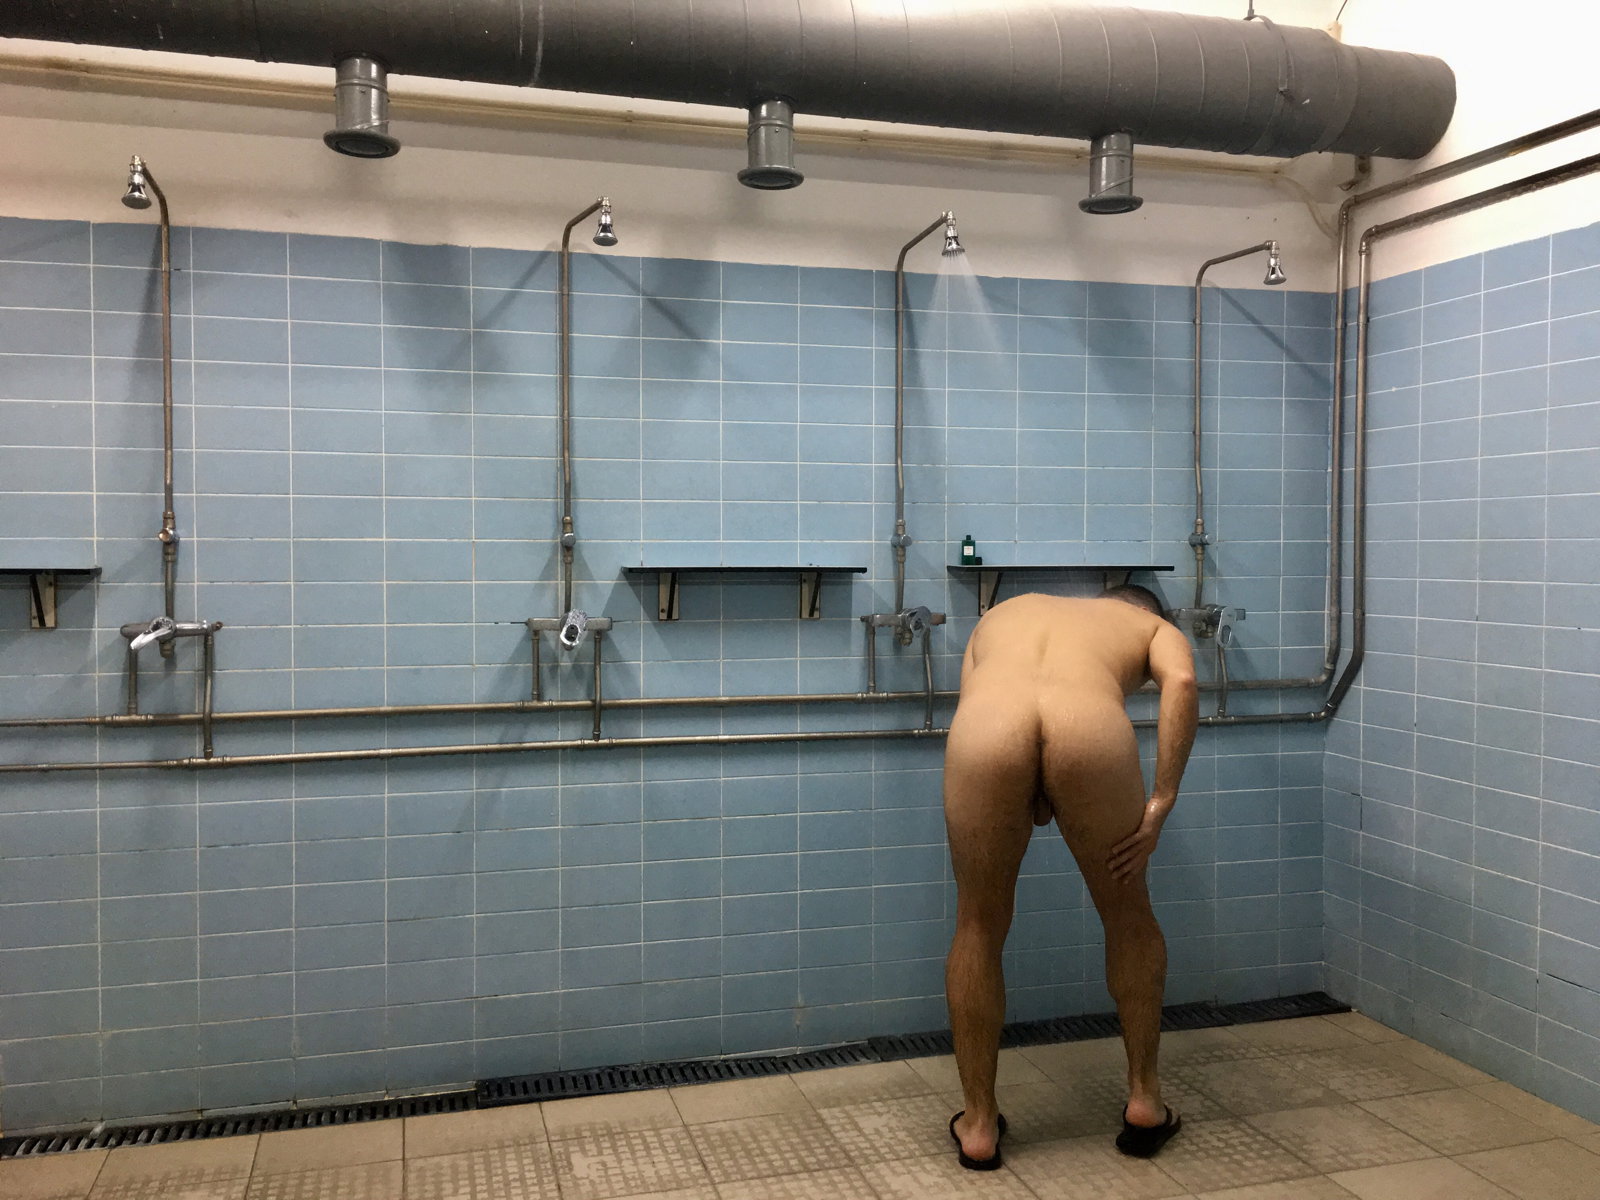 Photo by Fan in Heat with the username @faninheat, who is a verified user,  April 19, 2019 at 5:39 PM. The post is about the topic Gay and the text says 'Rub, rub, rub
#gay #shower'